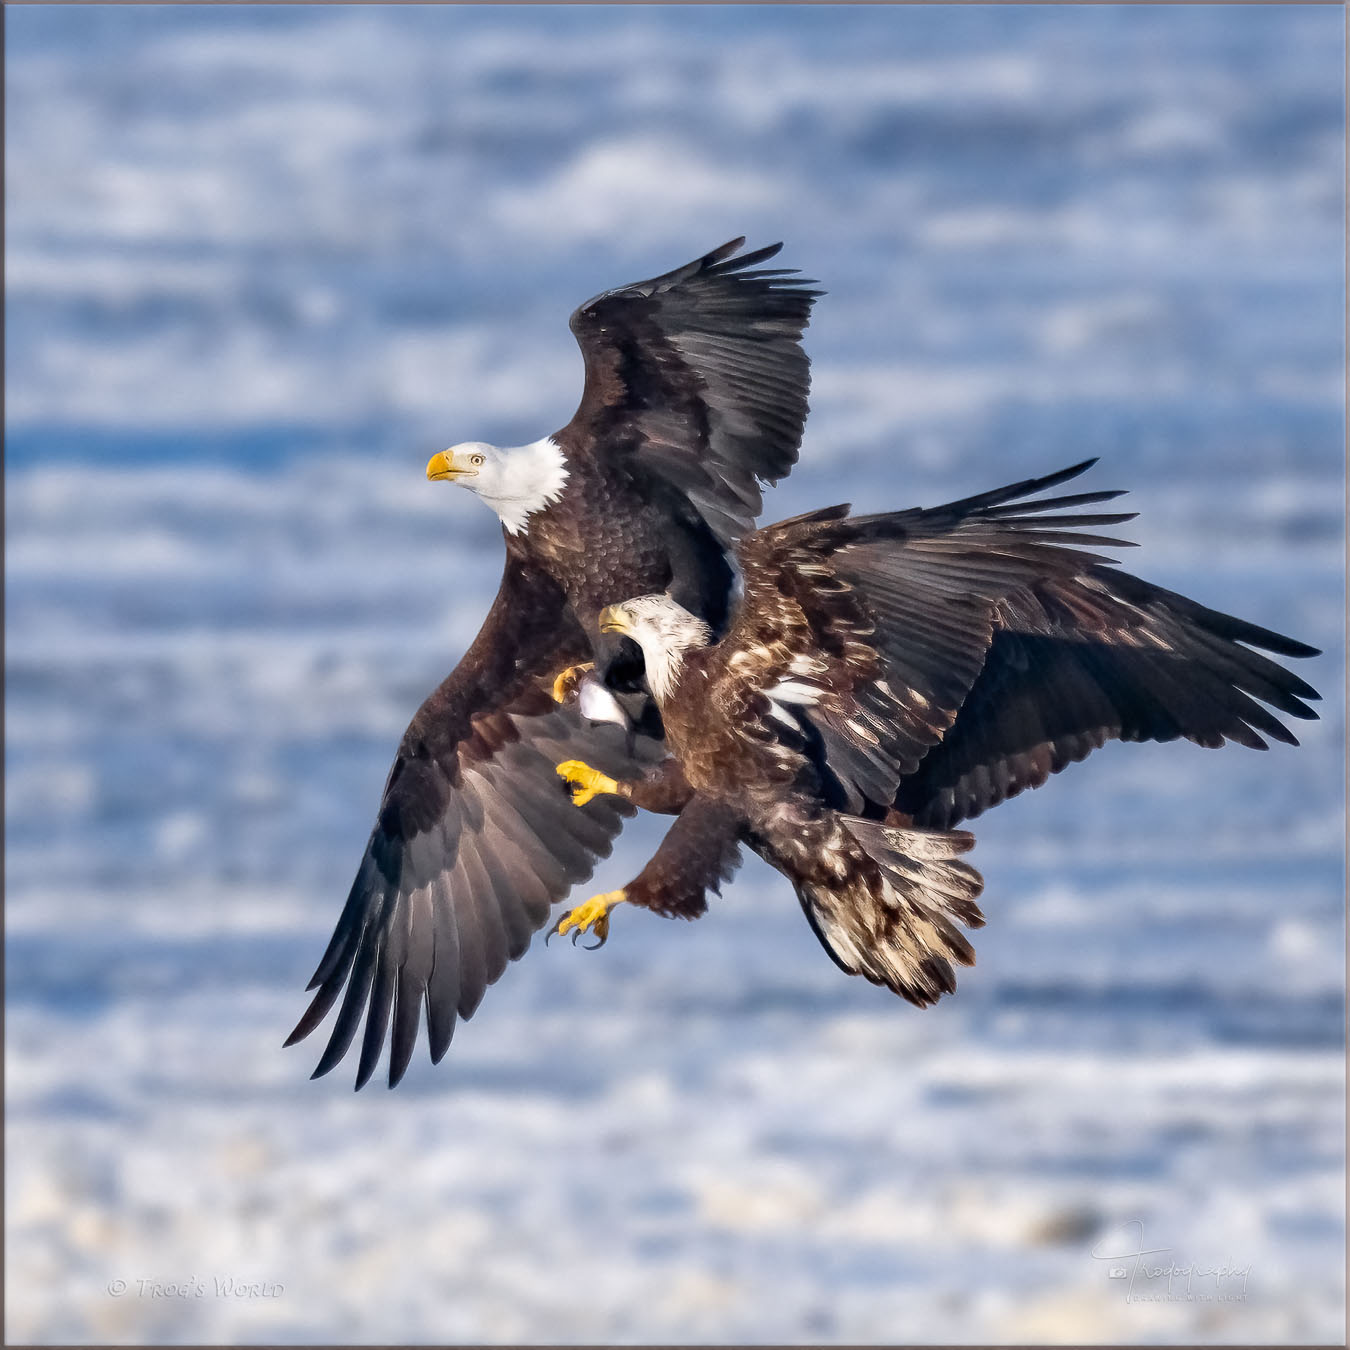 Two Bald Eagles fight over a fish